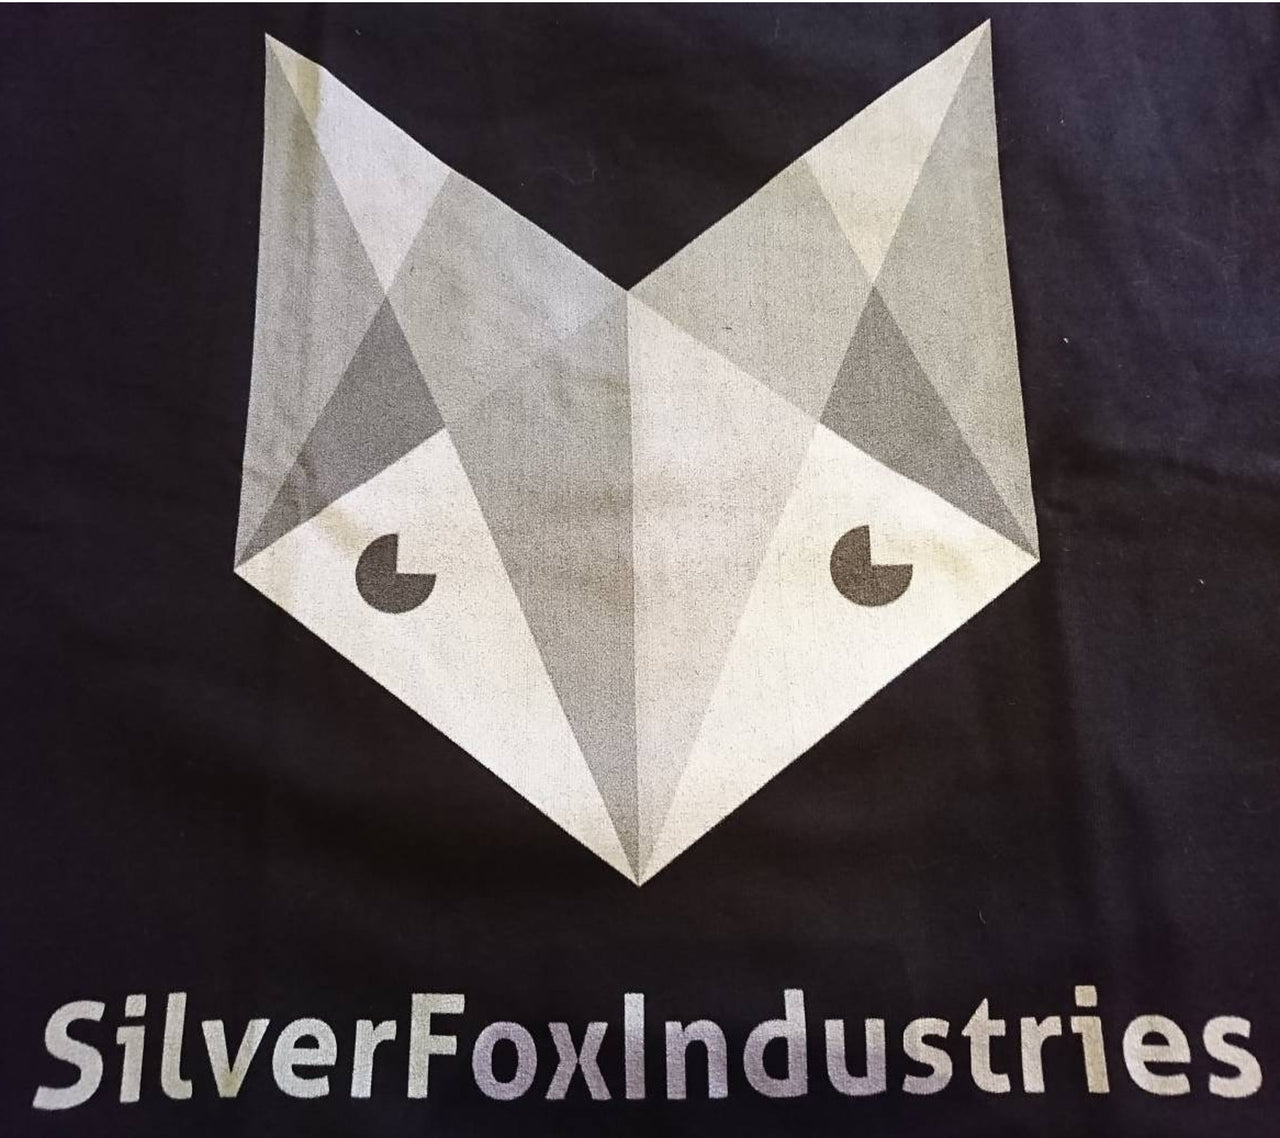 SilverFoxIndustries "Daily Routine" T-Shirt